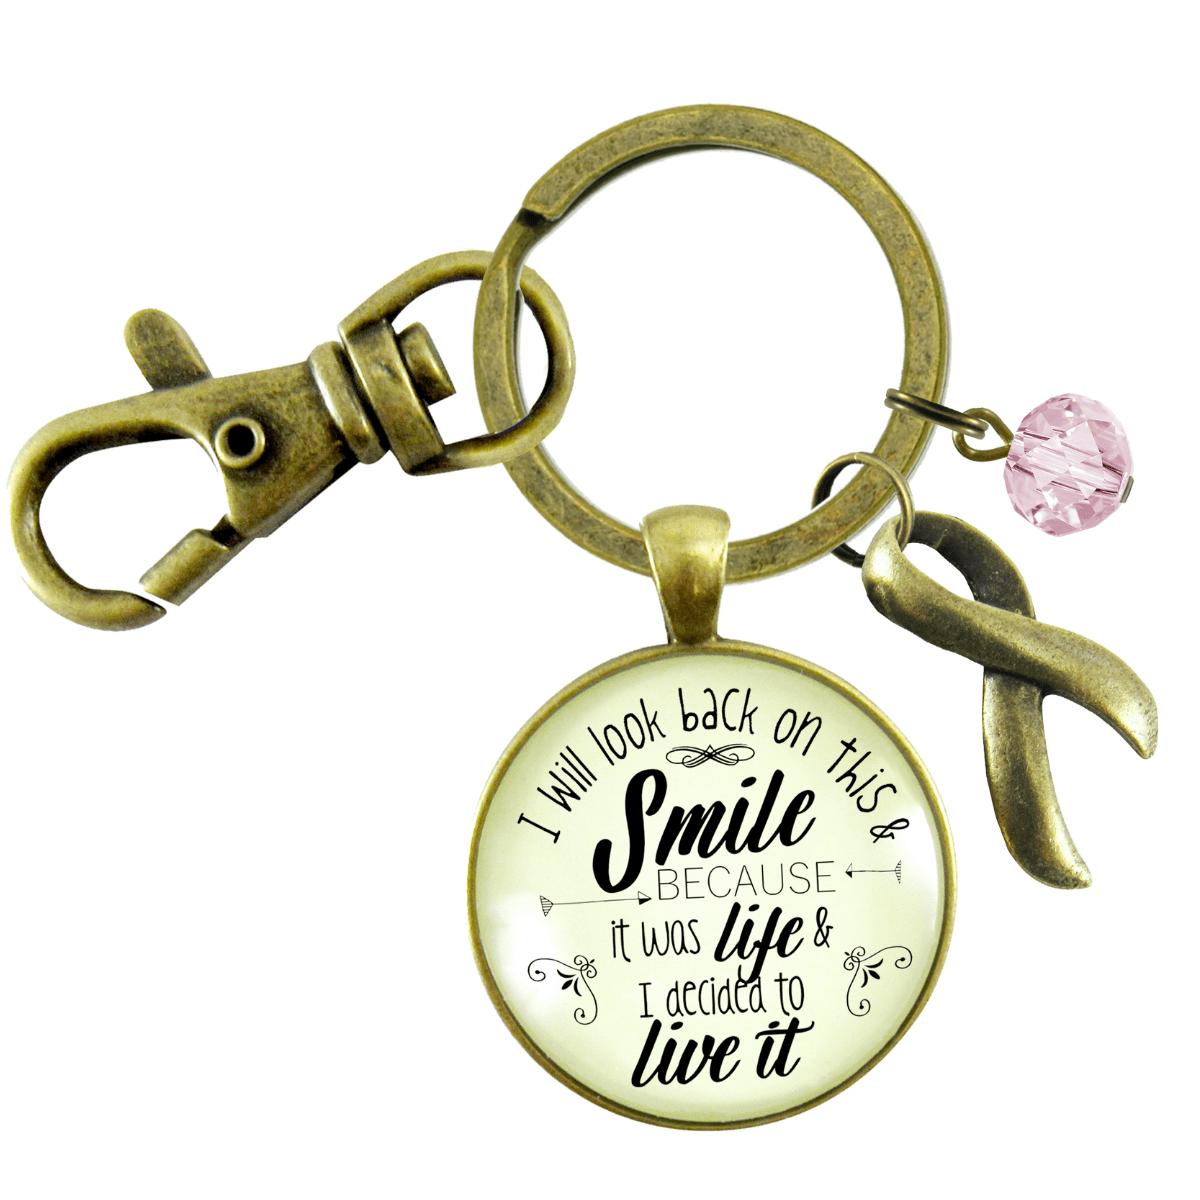 Breast Cancer Keychain I Will Look Back Life Survivor Mantra Jewelry - Gutsy Goodness Handmade Jewelry;Breast Cancer Keychain I Will Look Back Life Survivor Mantra Jewelry - Gutsy Goodness Handmade Jewelry Gifts